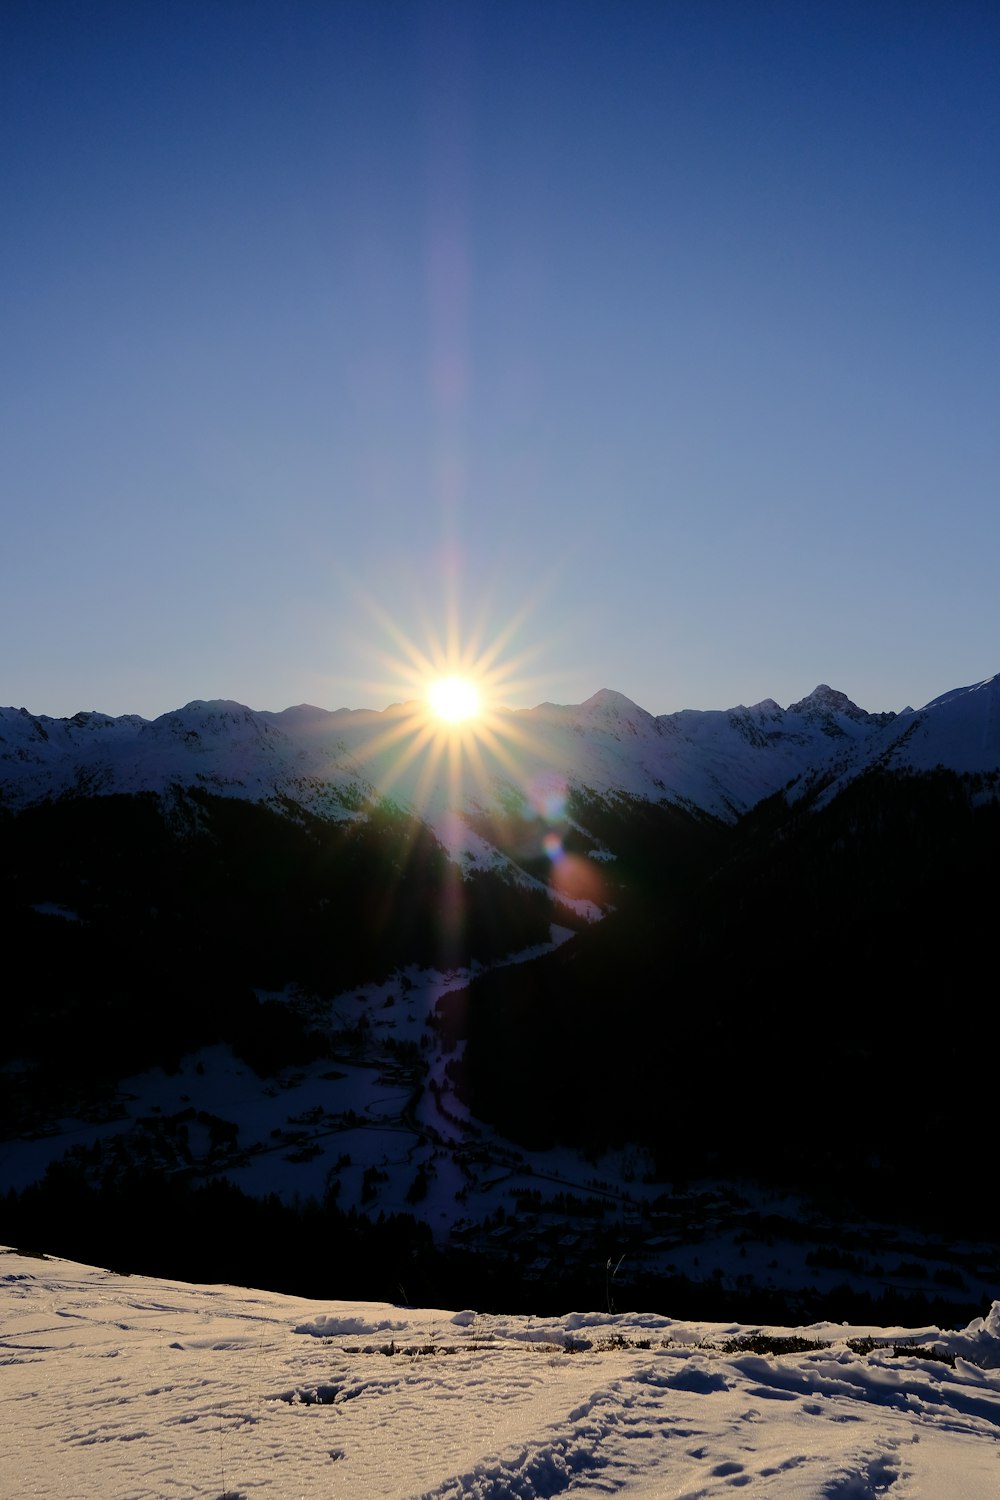 the sun is shining over a snowy mountain